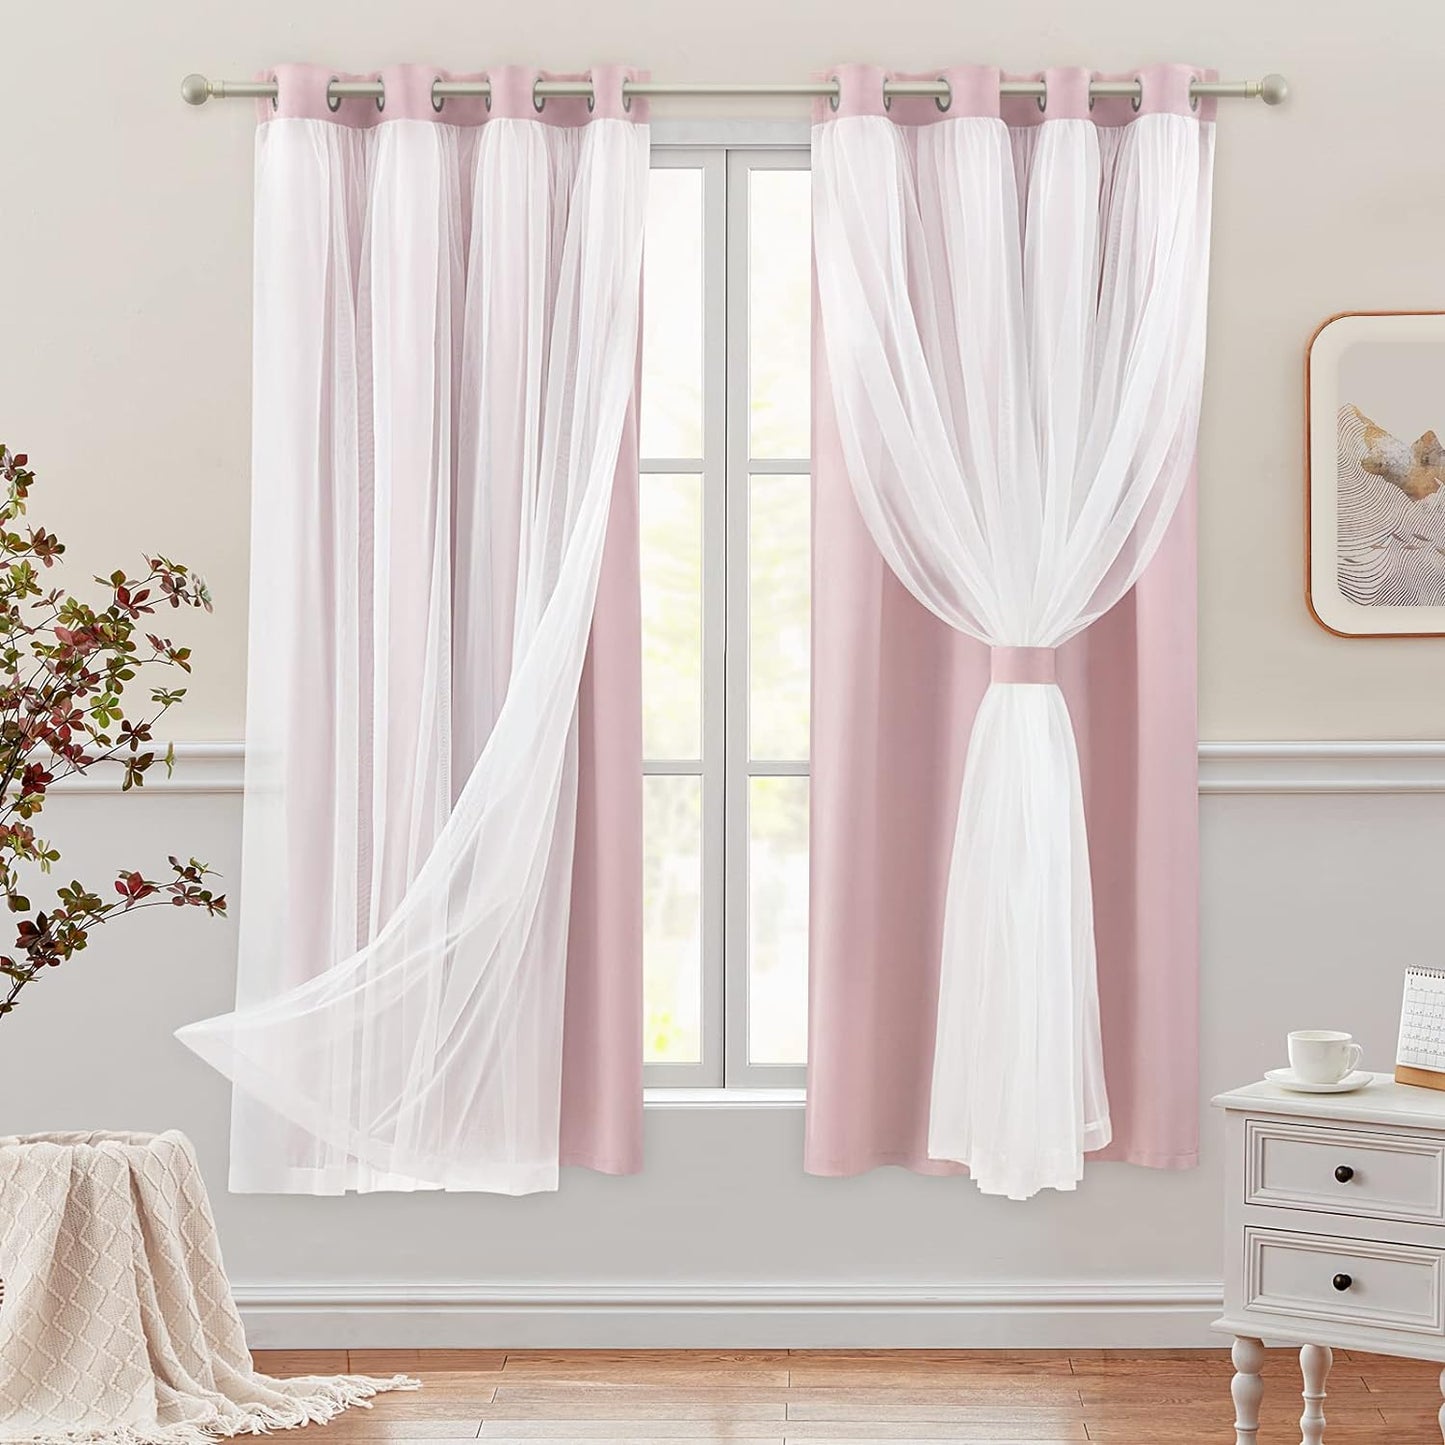 HOMEIDEAS Double Layer Curtains Light Grey Blackout Curtains 84 Inch Length 2 Panels Nursery Curtains for Girls Kids Bedroom Grommet Blackout Curtains with Sheer Overlay  HOMEIDEAS Pink 52" X 63" 